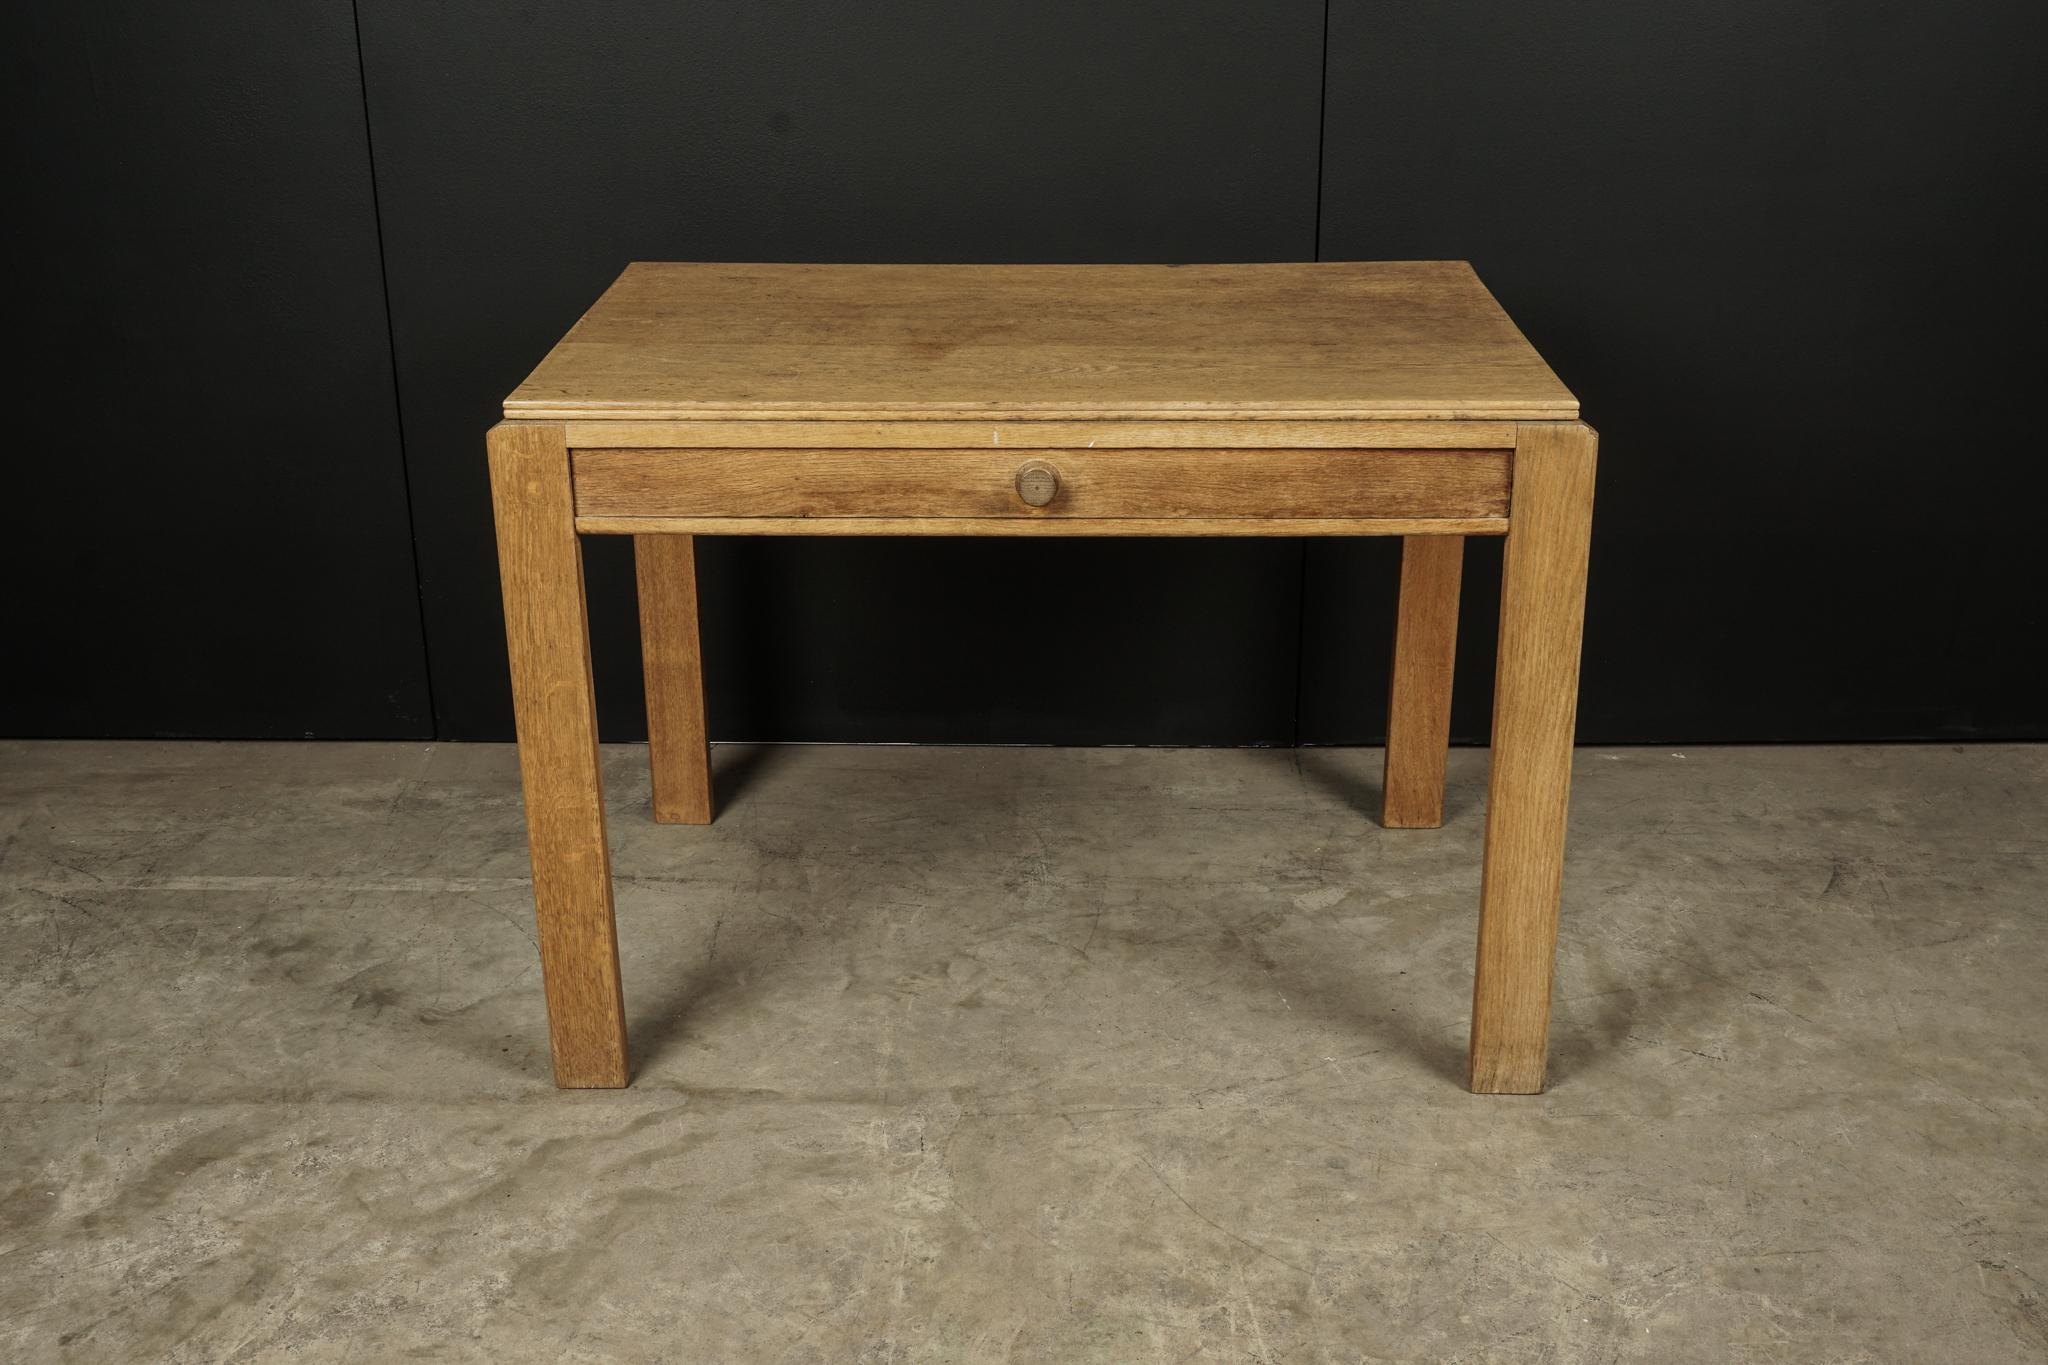 Midcentury oak desk From France, circa 1960. Solid oak construction with drawer. Original manufacturers label on the inside drawer from Lyon, France.